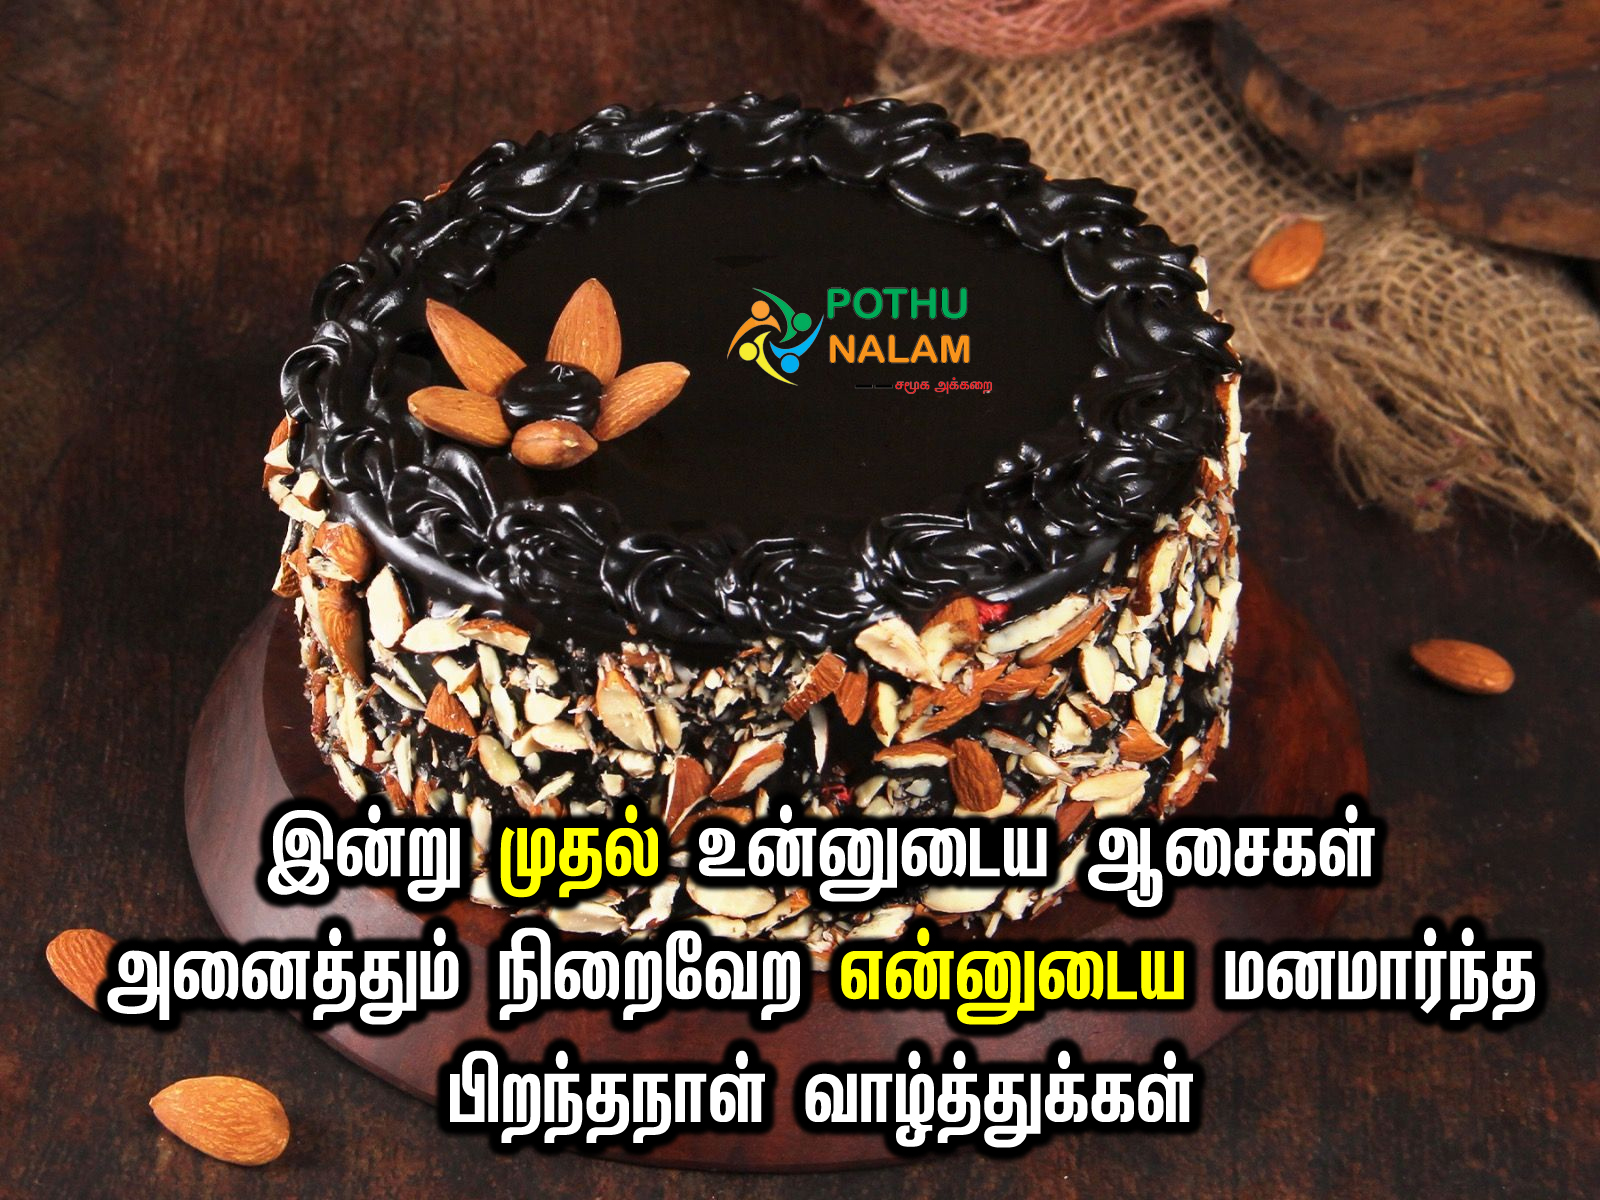 Happy Birthday Wishes in Tamil: